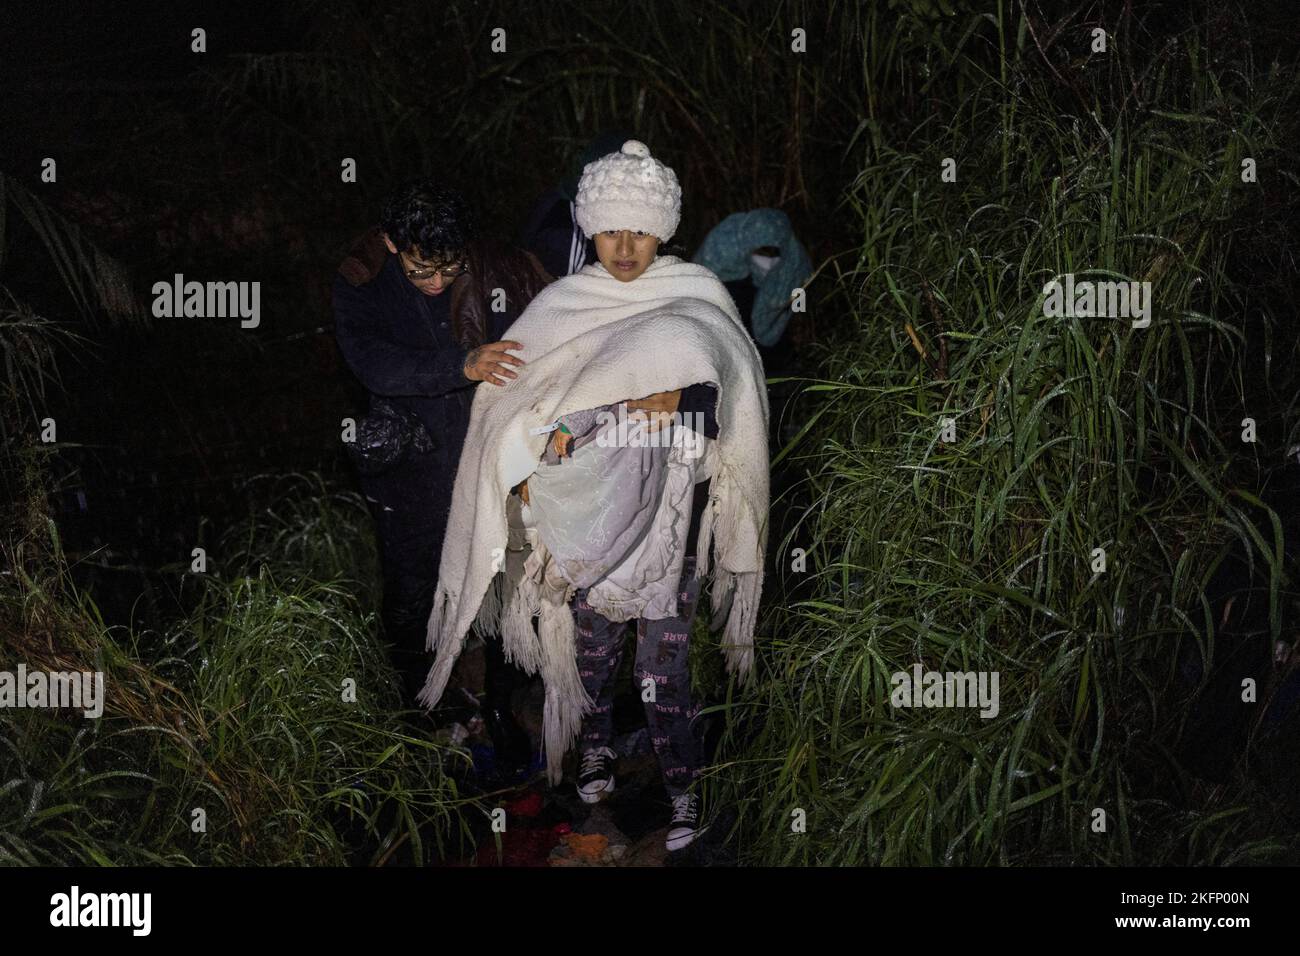 A color coded plastic band used by cartels and smugglers to track paying migrants is seen on the wrist of nine month old Valentino, of Peru, as he is carried by his mother Marbel and followed by his father Carlos, as they navigate thick brush and cold, wet weather after crossing the Rio Grande river from Mexico into Roma, Texas, U.S., November 18, 2022.  REUTERS/Adrees Latif     TPX IMAGES OF THE DAY Stock Photo